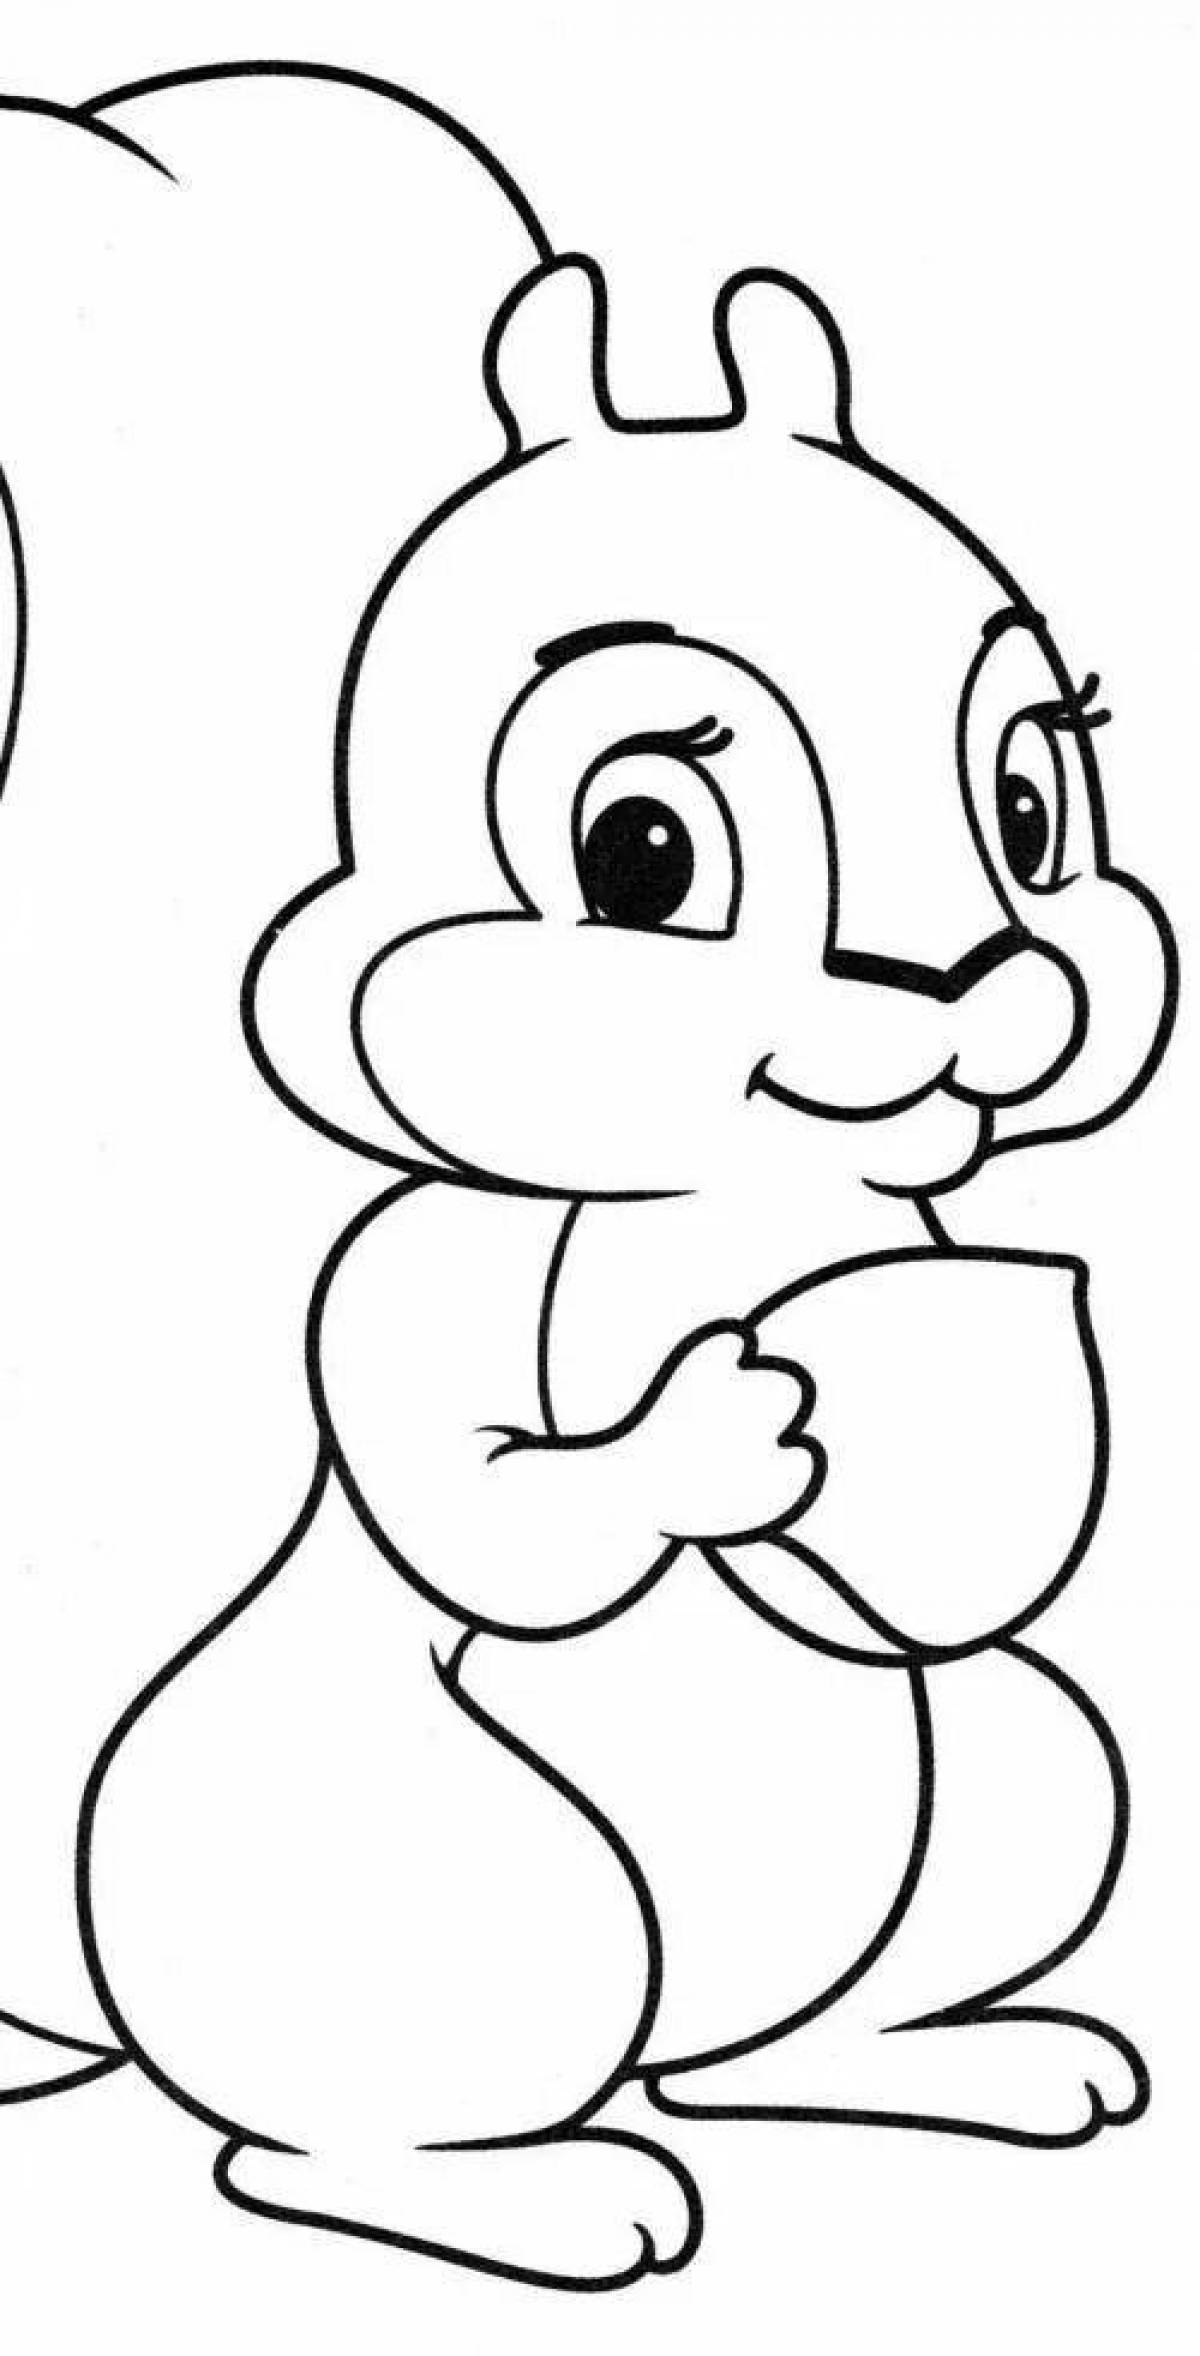 Animated squirrel coloring book for 3-4 year olds